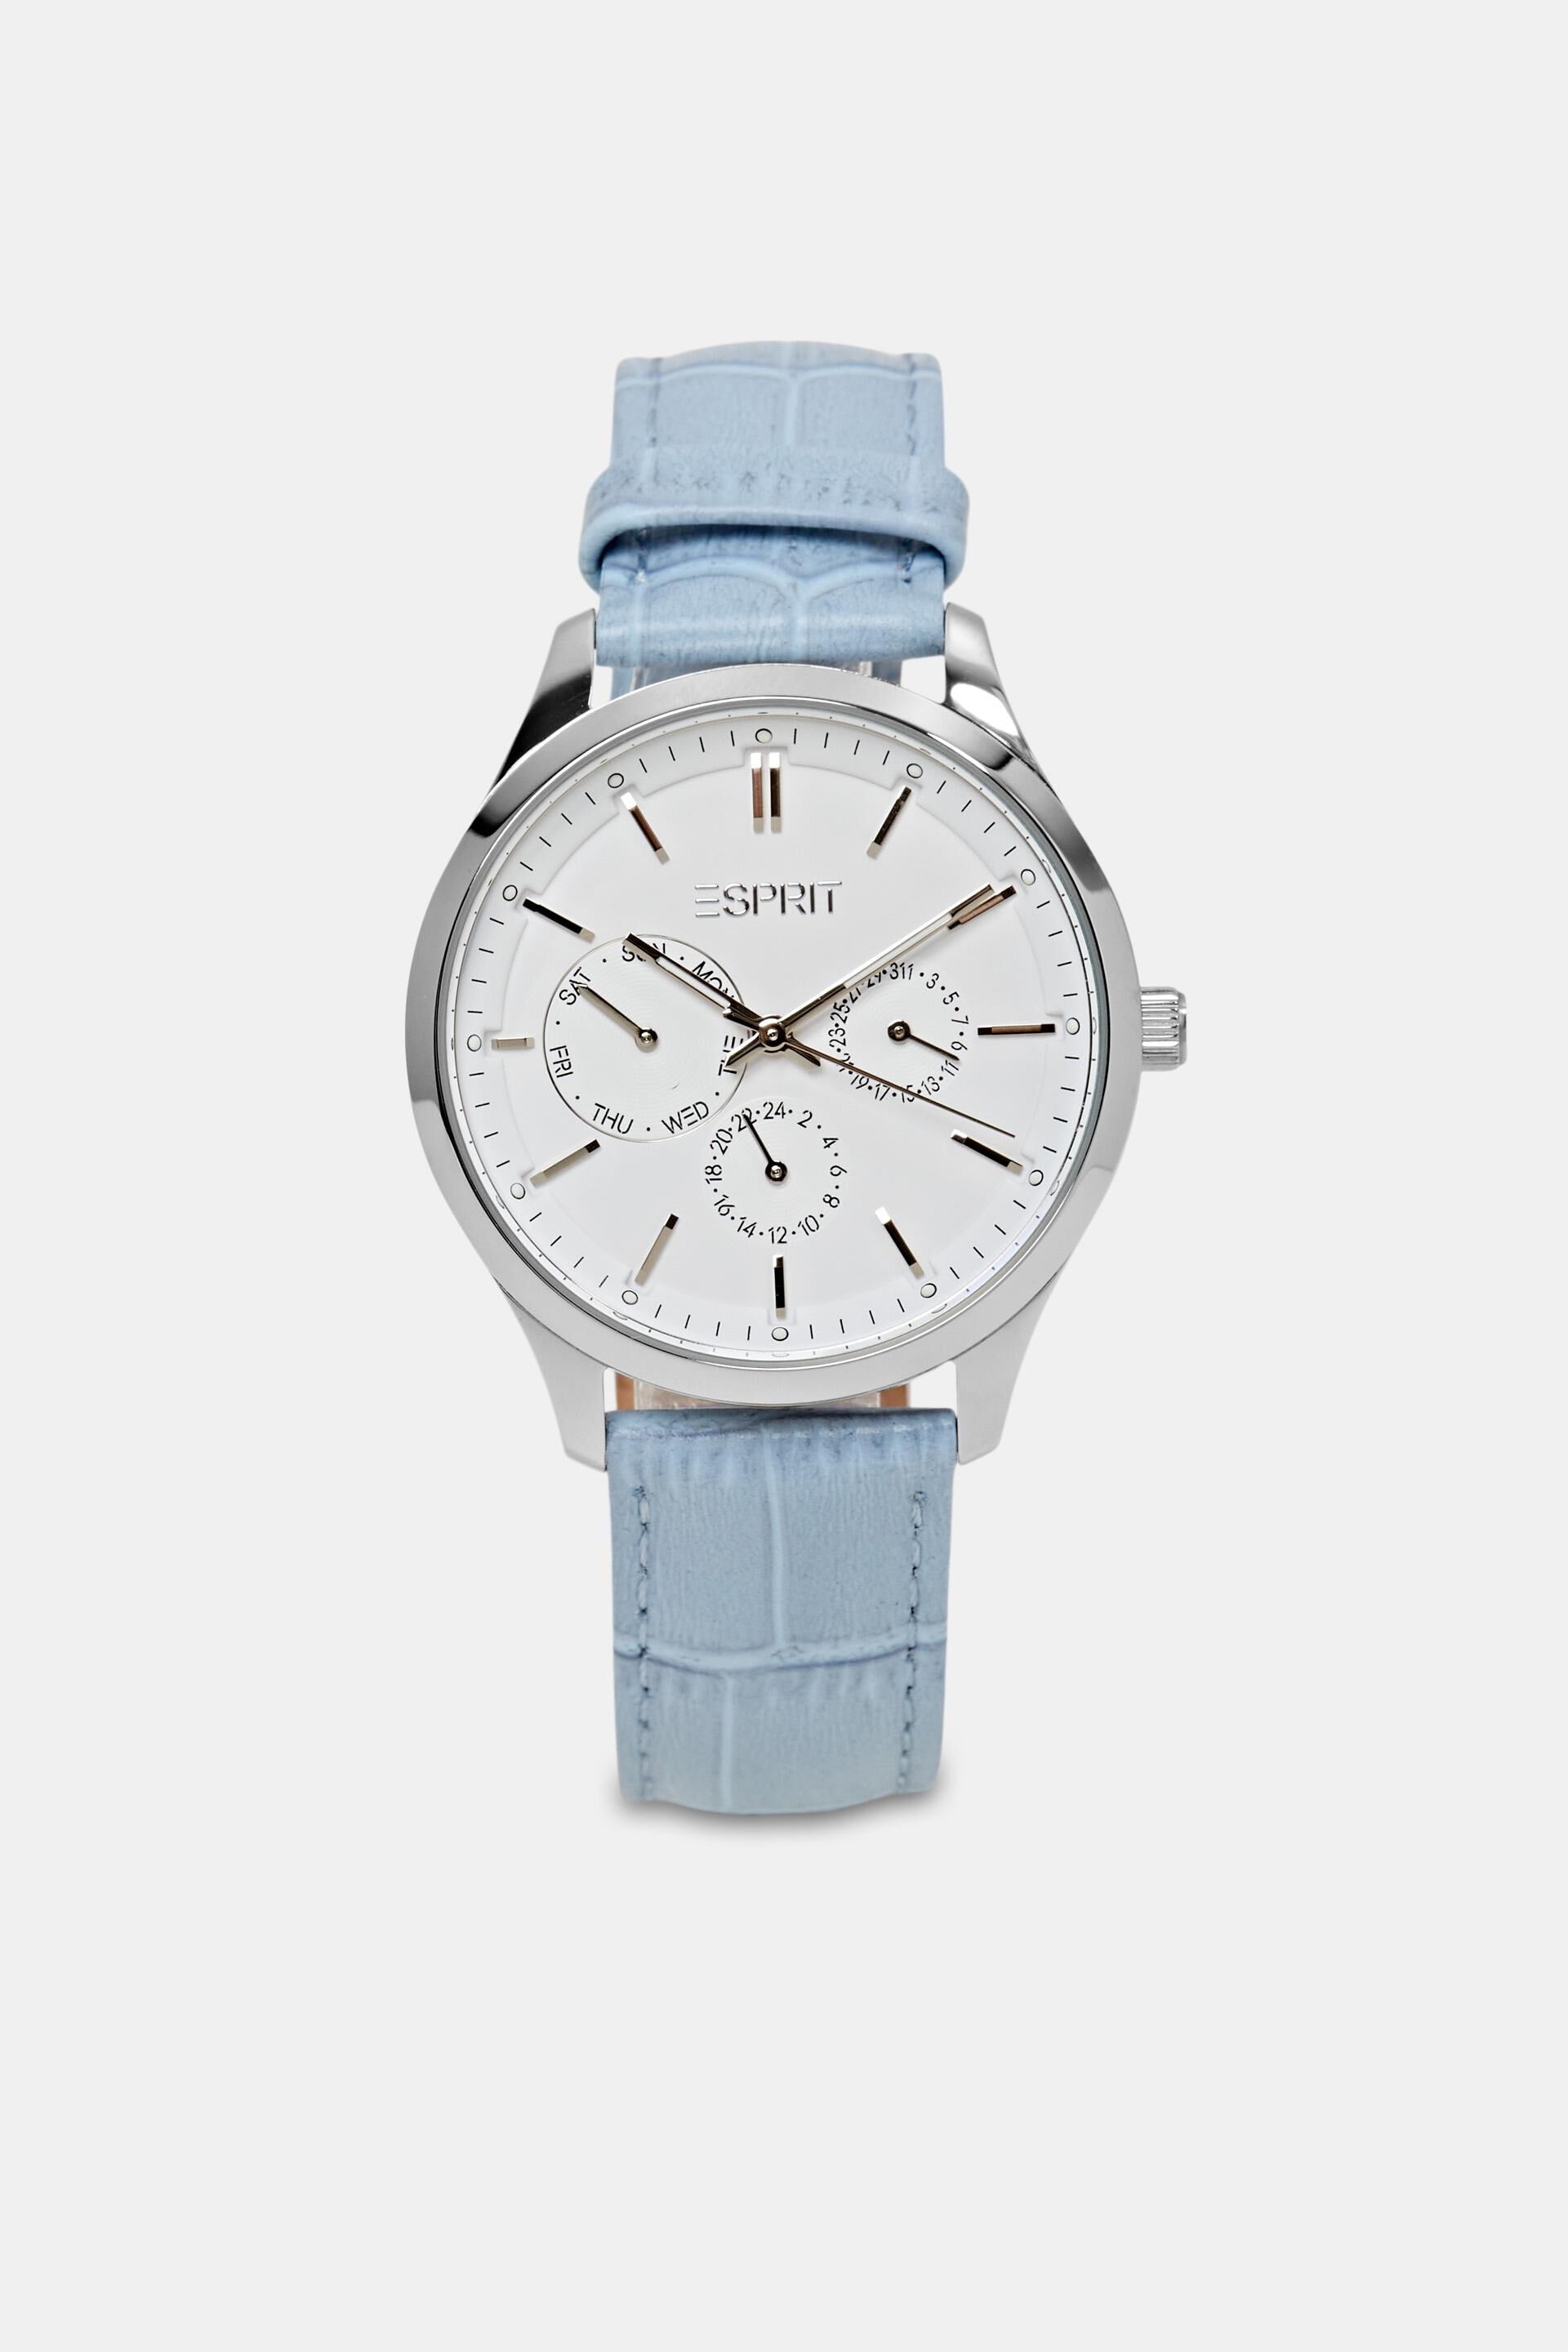 Esprit Online Store Multi-functional watch with a strap leather